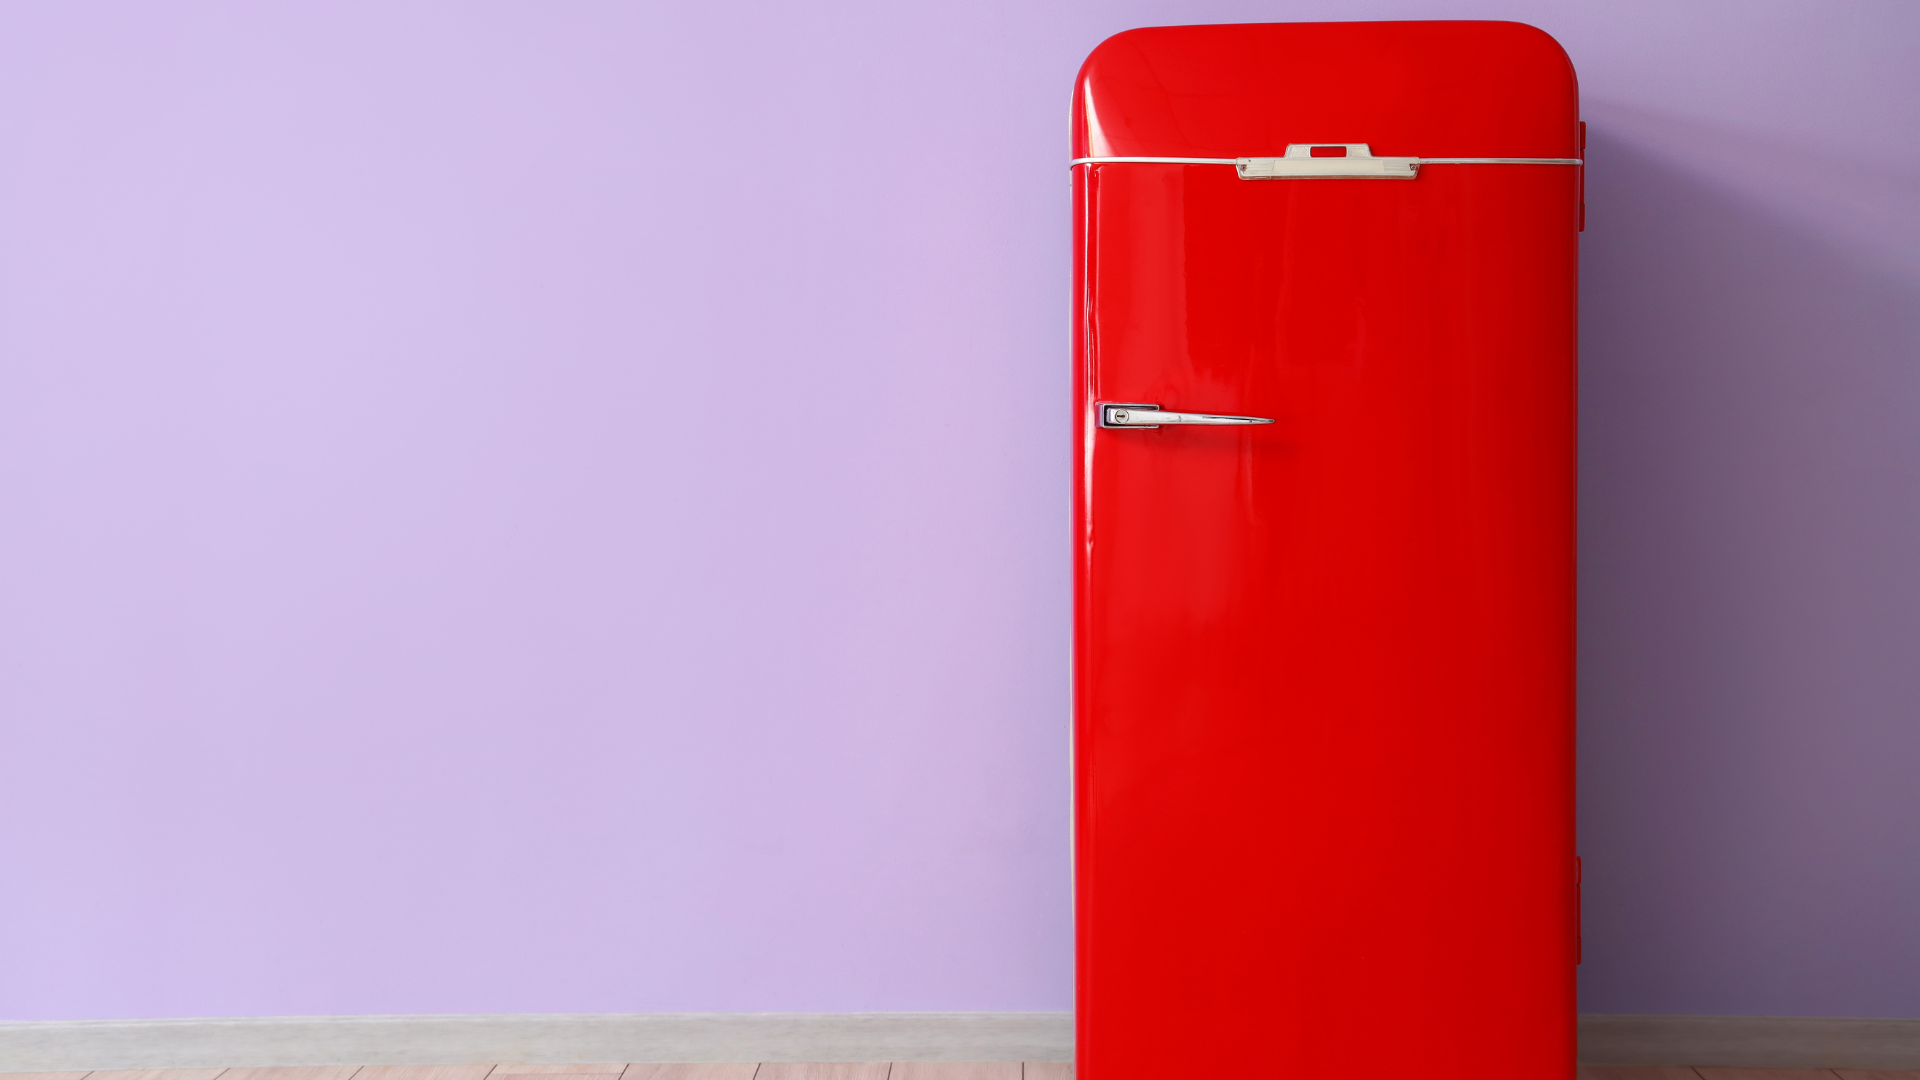 Red fridge against a light purple accent wall